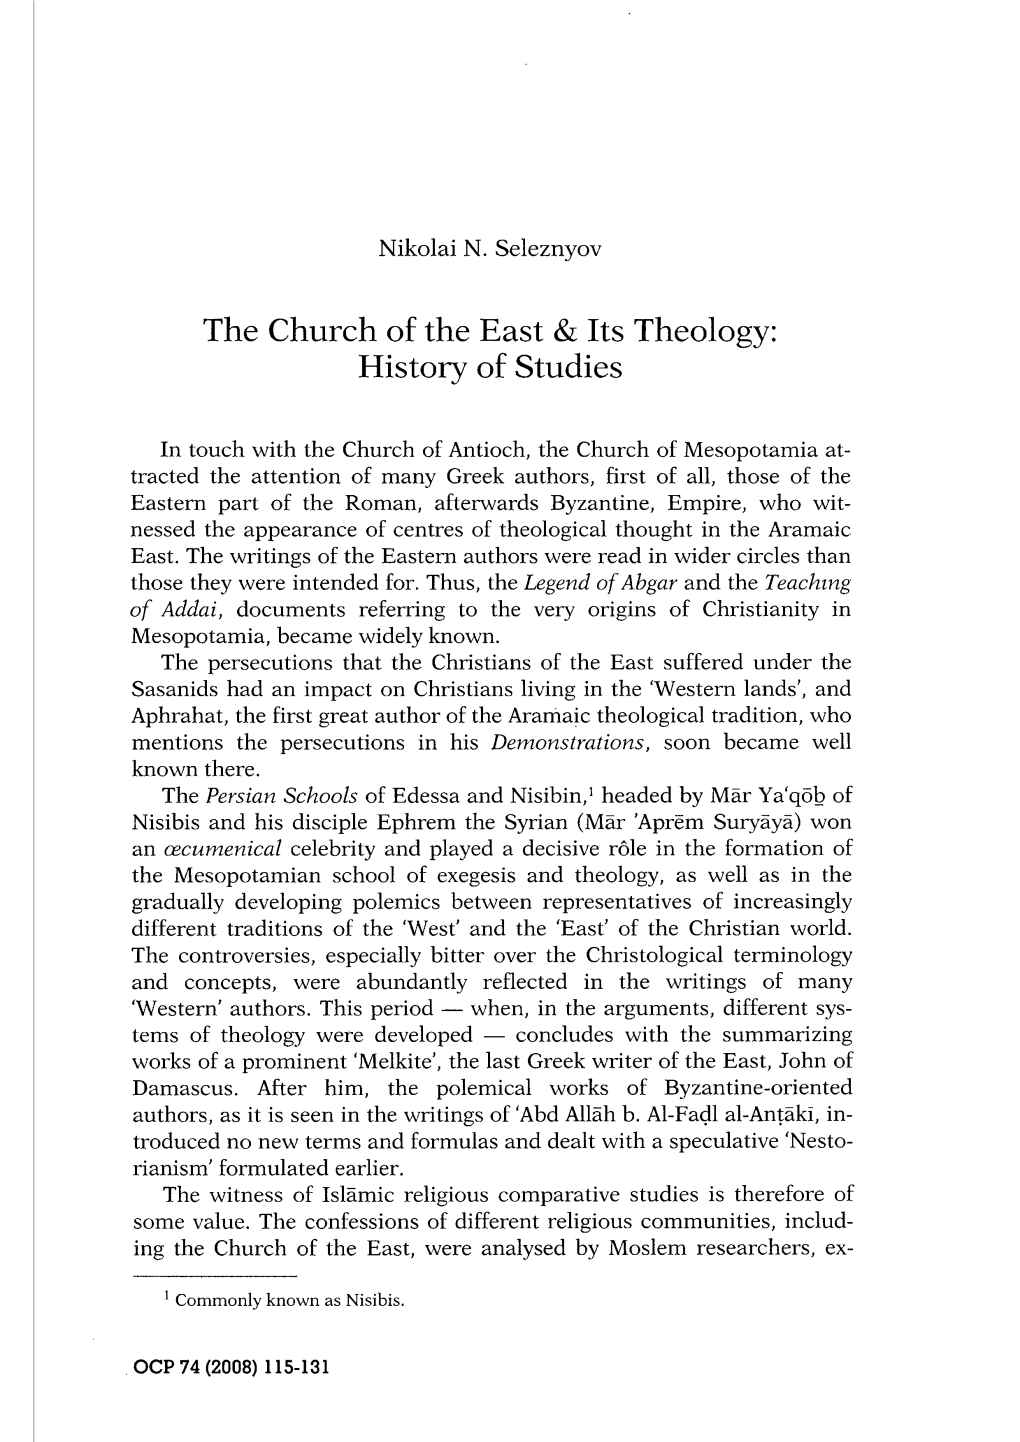 The Church of the East & Its Theology: History of Studies